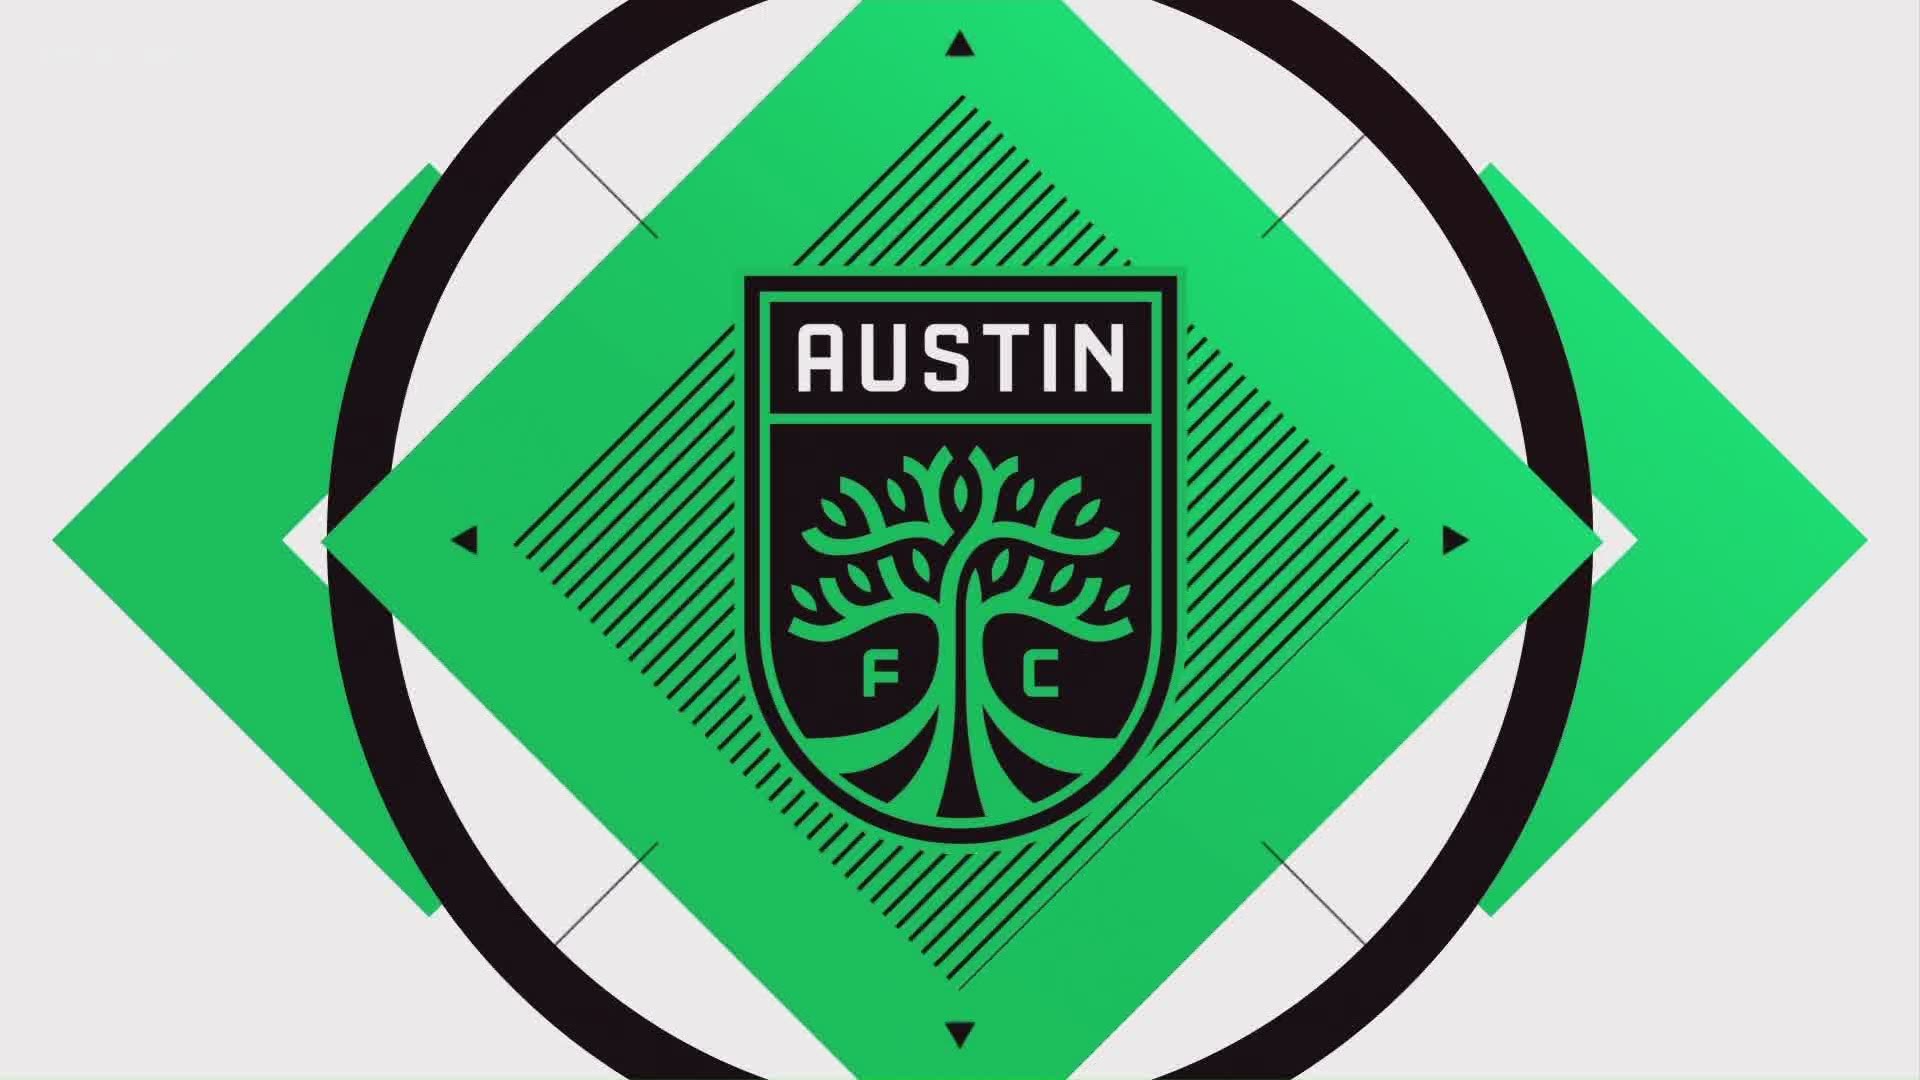 Approximately 15,500 season ticket memberships for Austin FC's inaugural season have been sold.